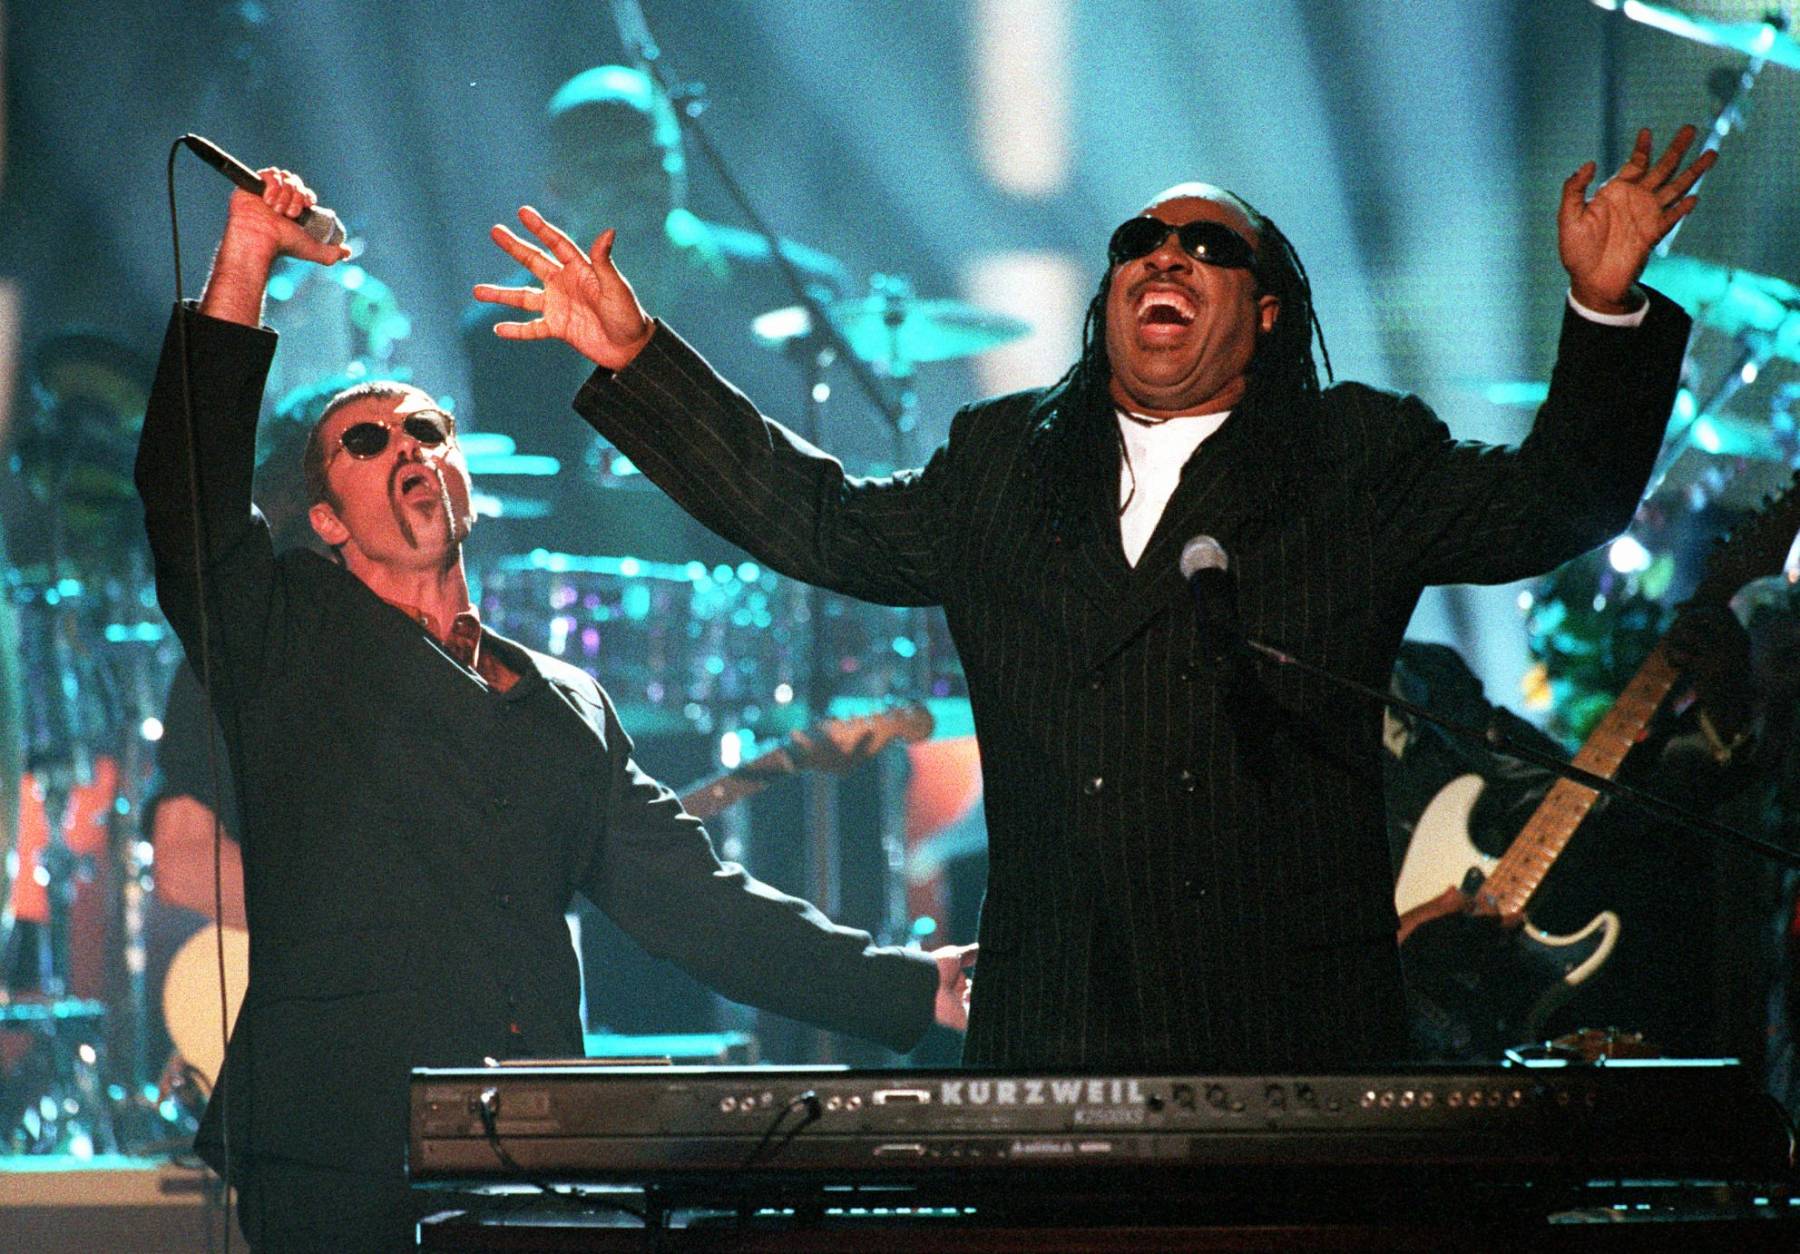 George Michael, left, and Stevie Wonder perform "Living for the City" at the "4th annual VH1 Honors" Thursday night, April 10, 1997, in Universal City, Calif. (AP Photo/Mark J. Terrill)